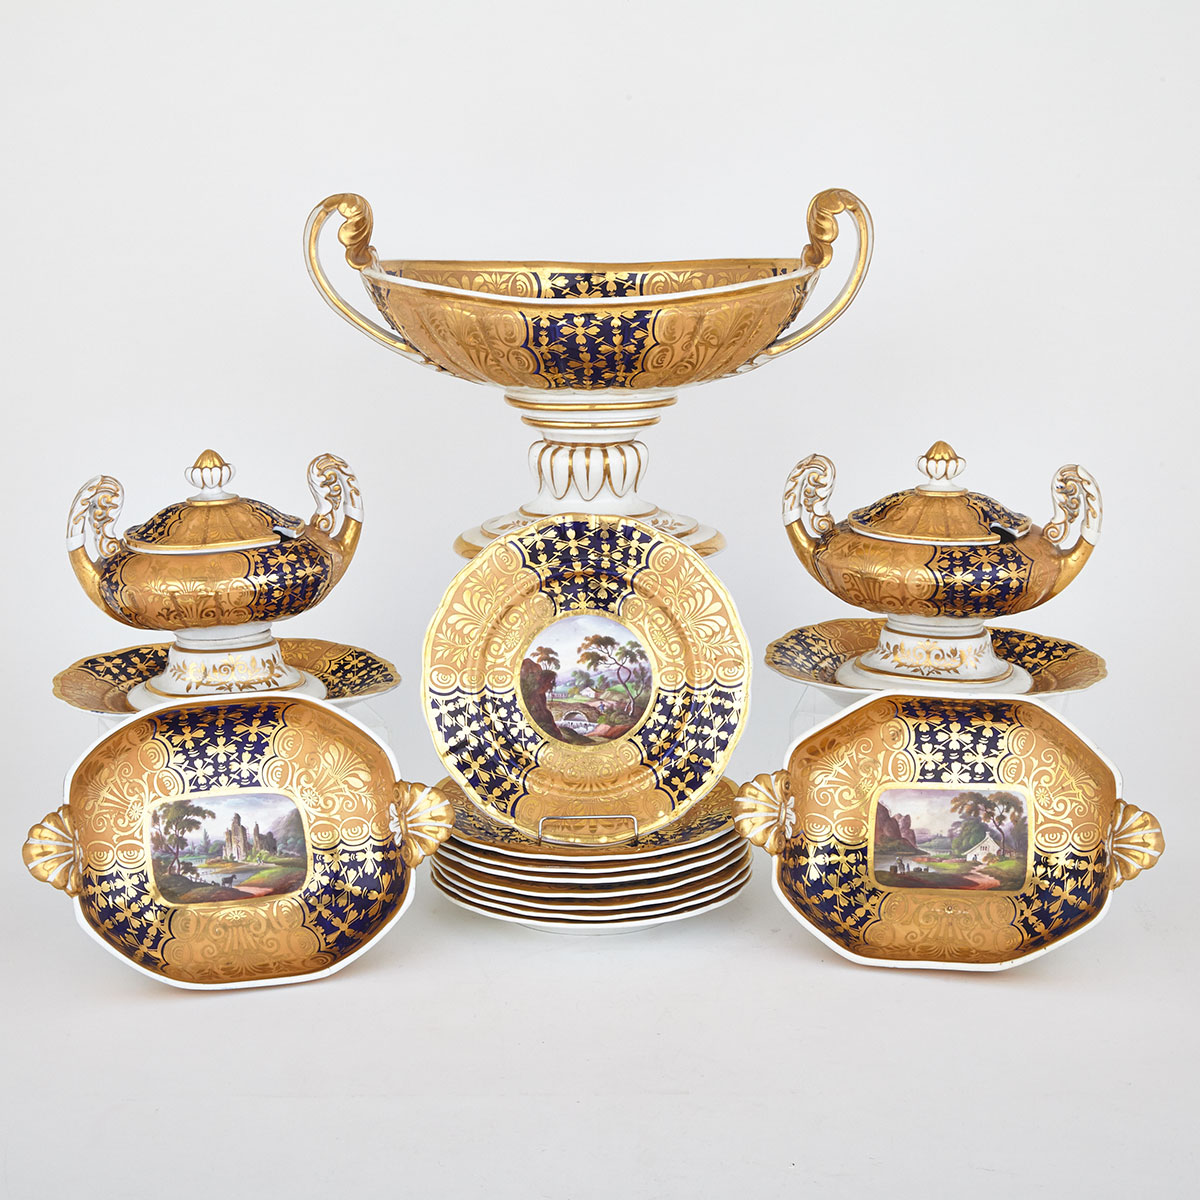 English Porcelain Apricot and Blue Ground Dessert Service, probably Spode, c.1810